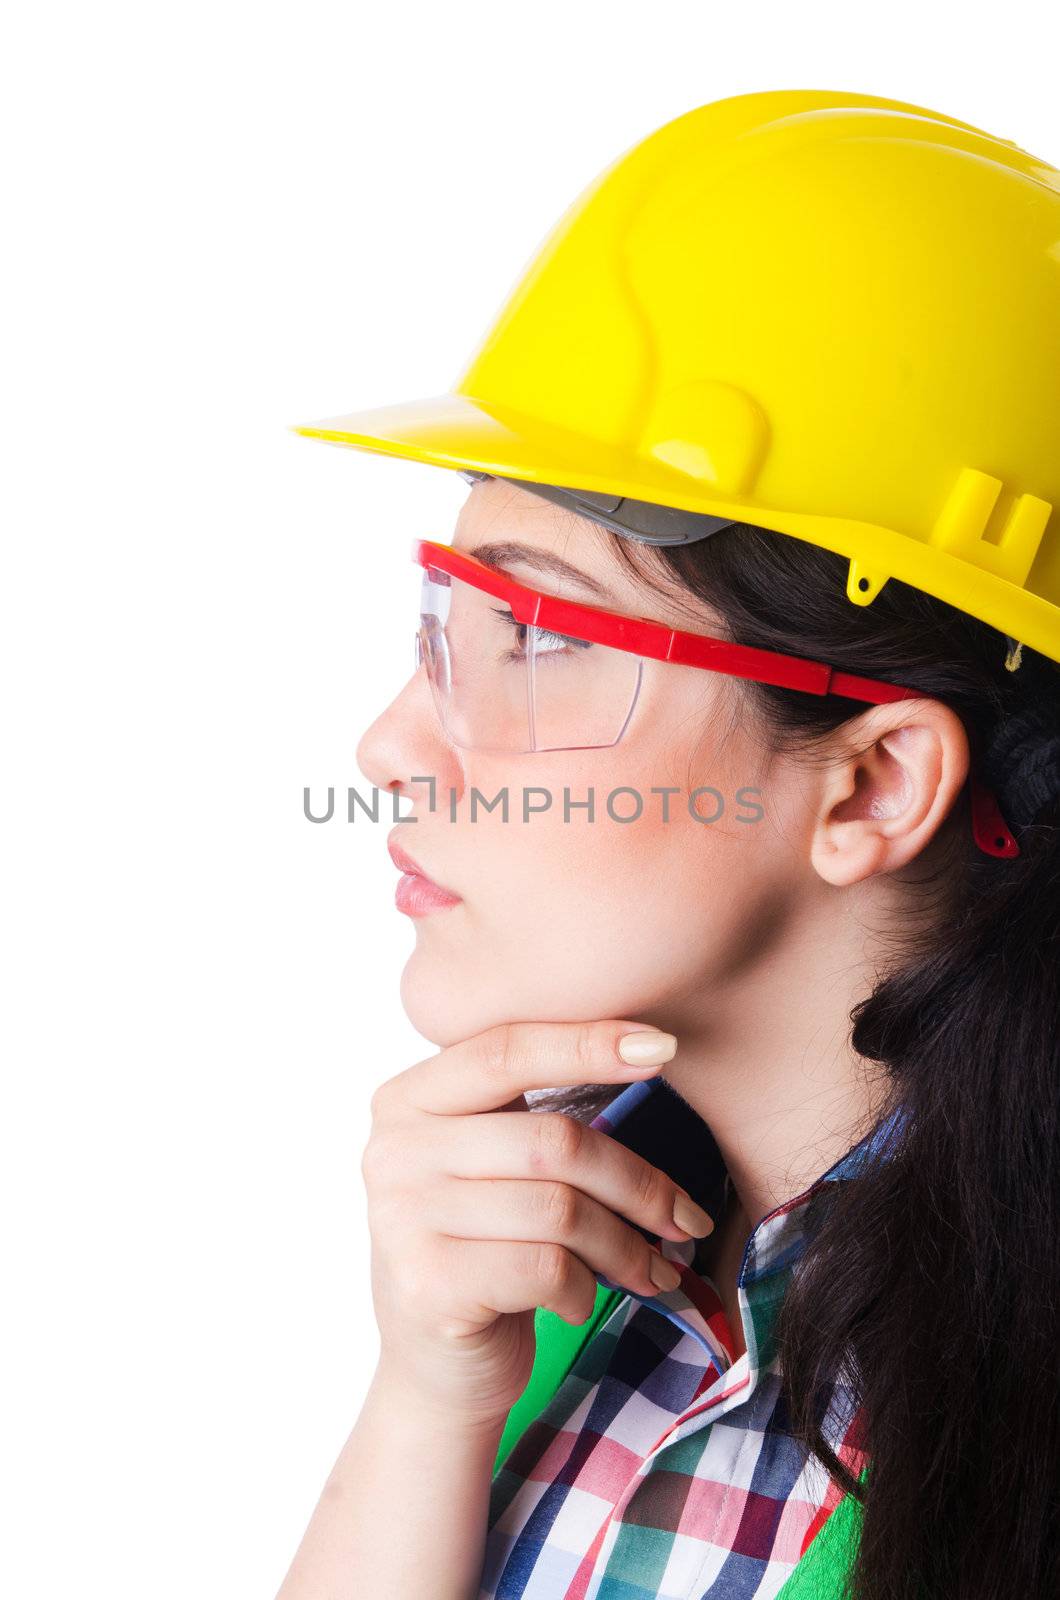 Female construction worker isolated on white